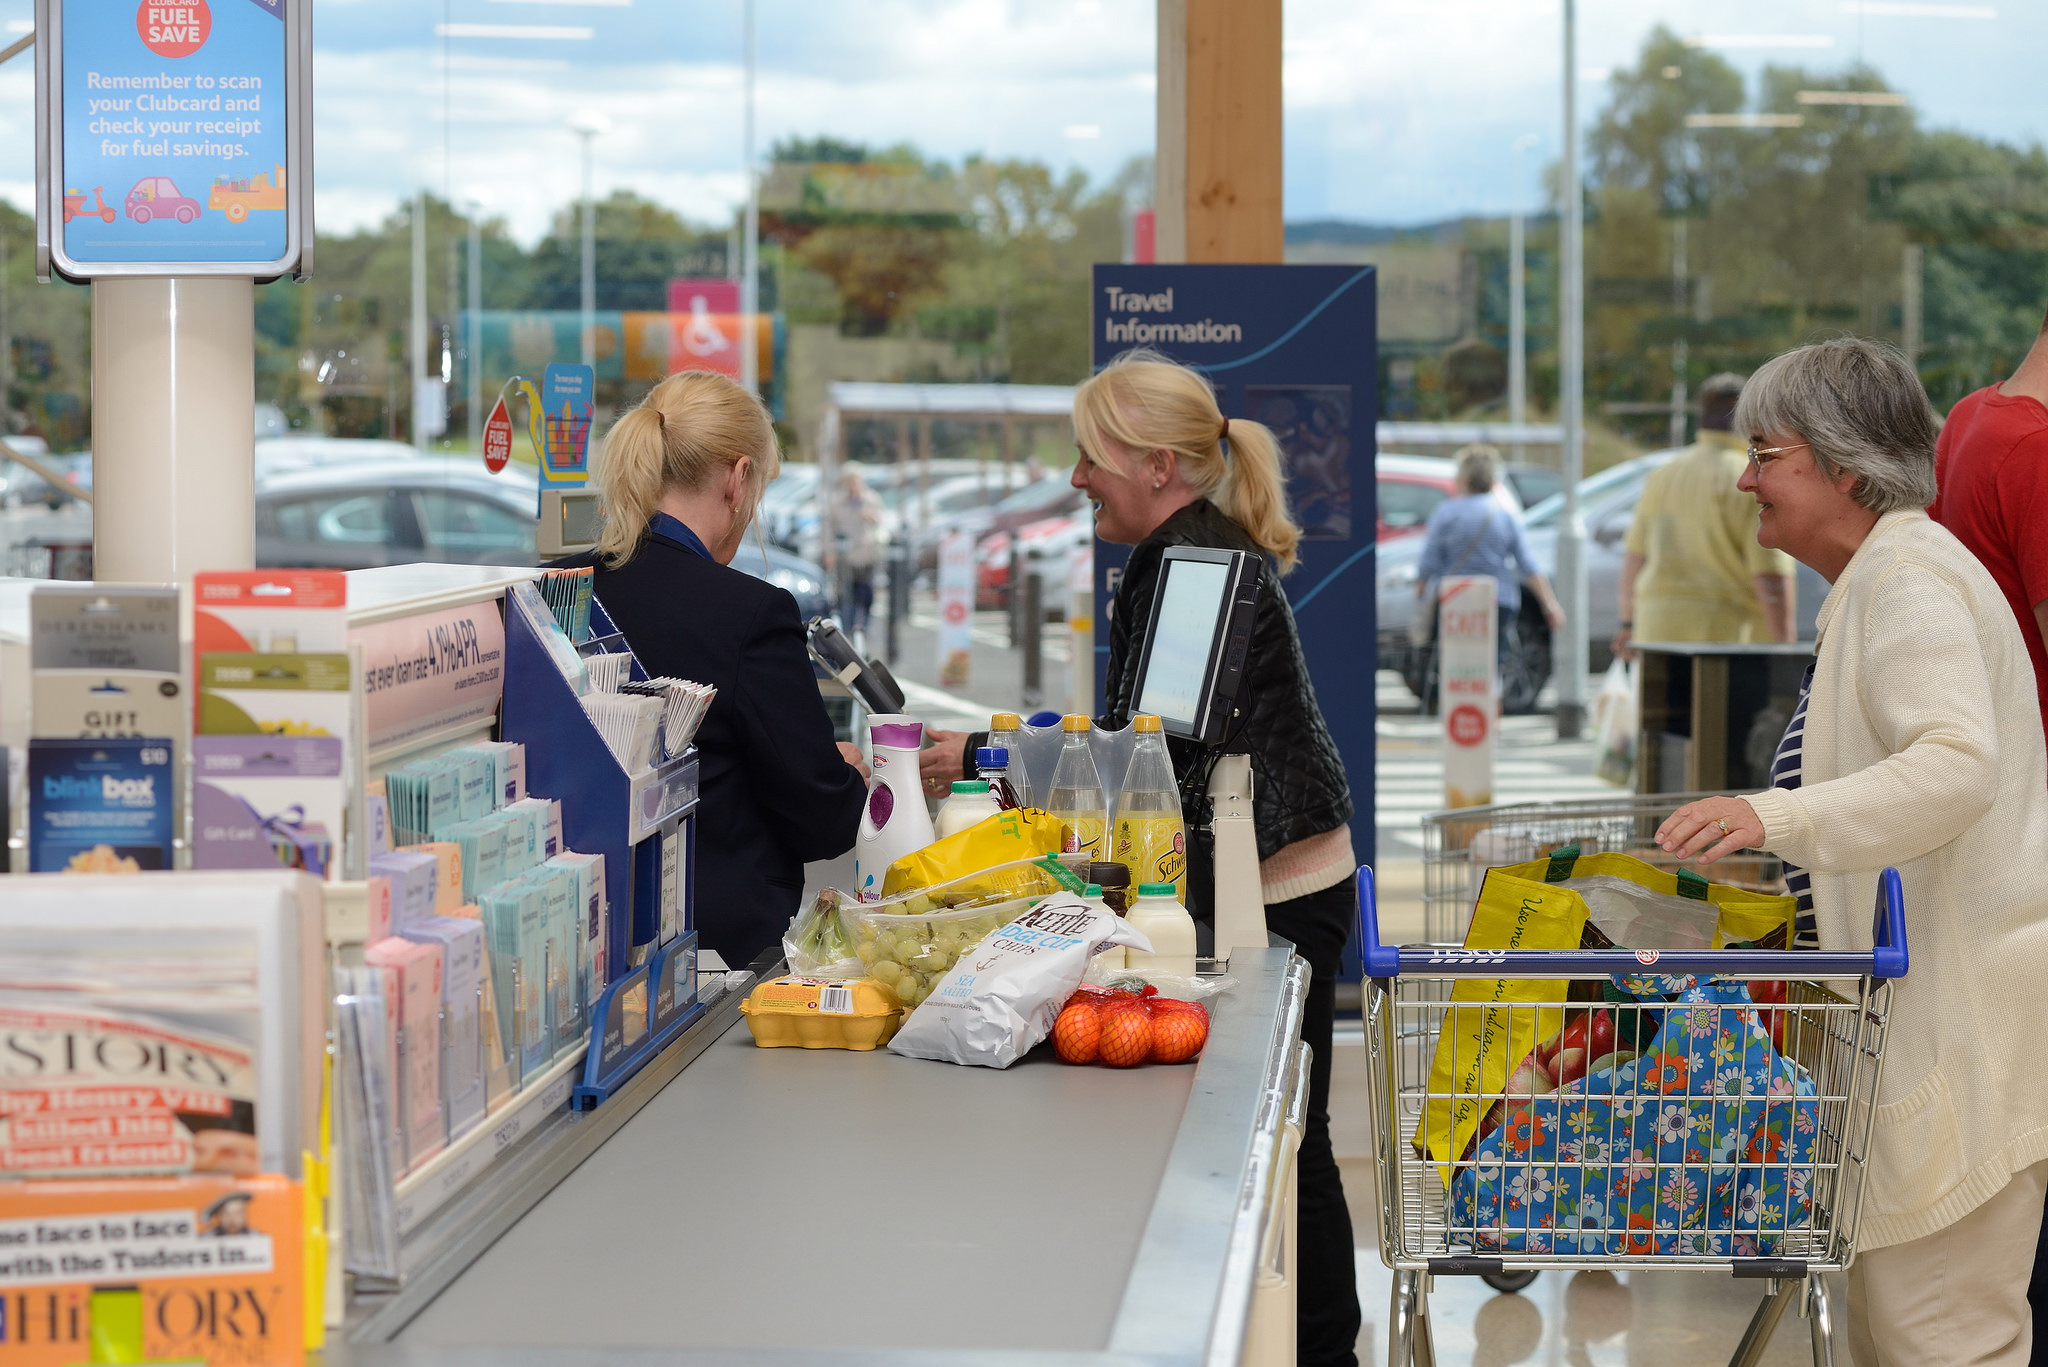 Tesco removed sweets and chocolates from the checkouts at larger UK stores 20 years ago, but for the first time they have been removed from checkouts at all stores, including Tesco Metro and Express convenience stores